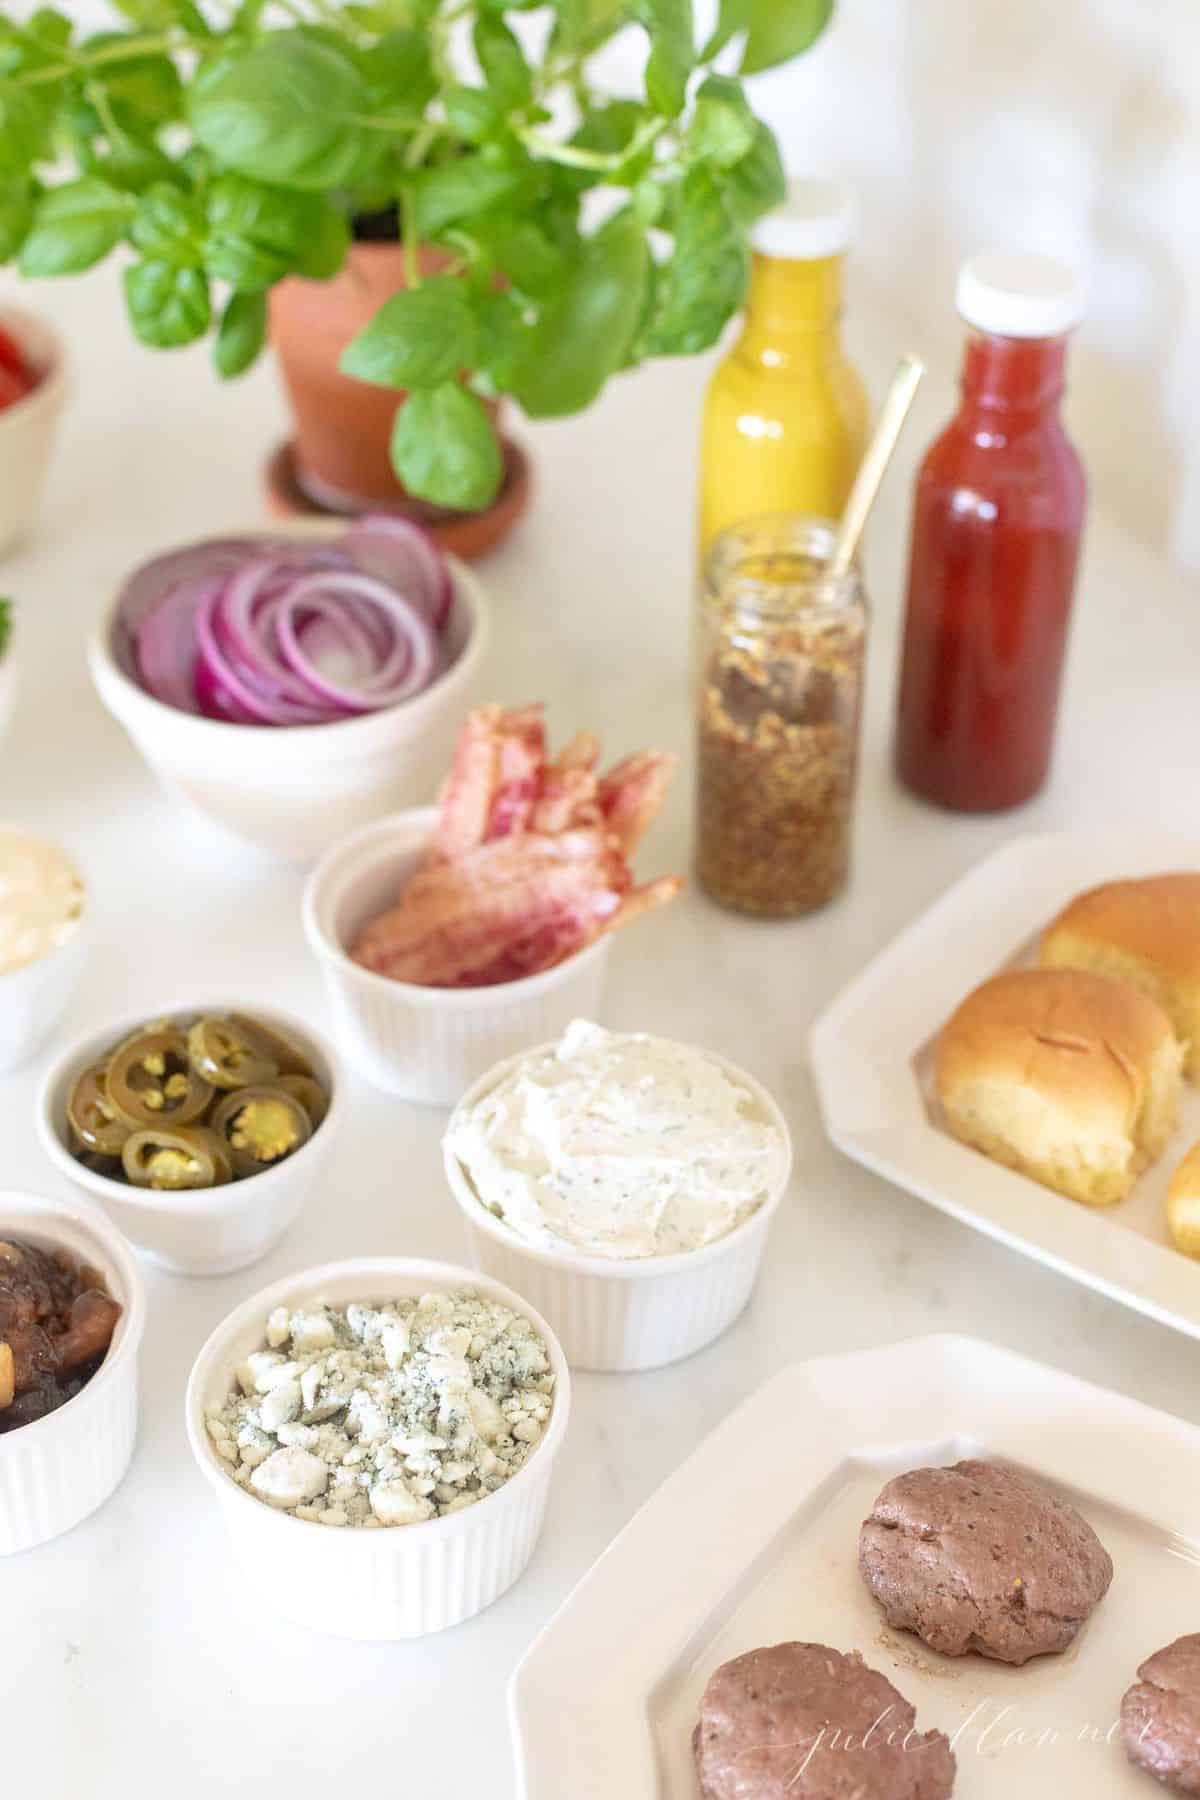 Burger toppings displayed in white ceramic bowls, condiments in rear and buns to the side. #burgerbar #burgershop #sliderbar